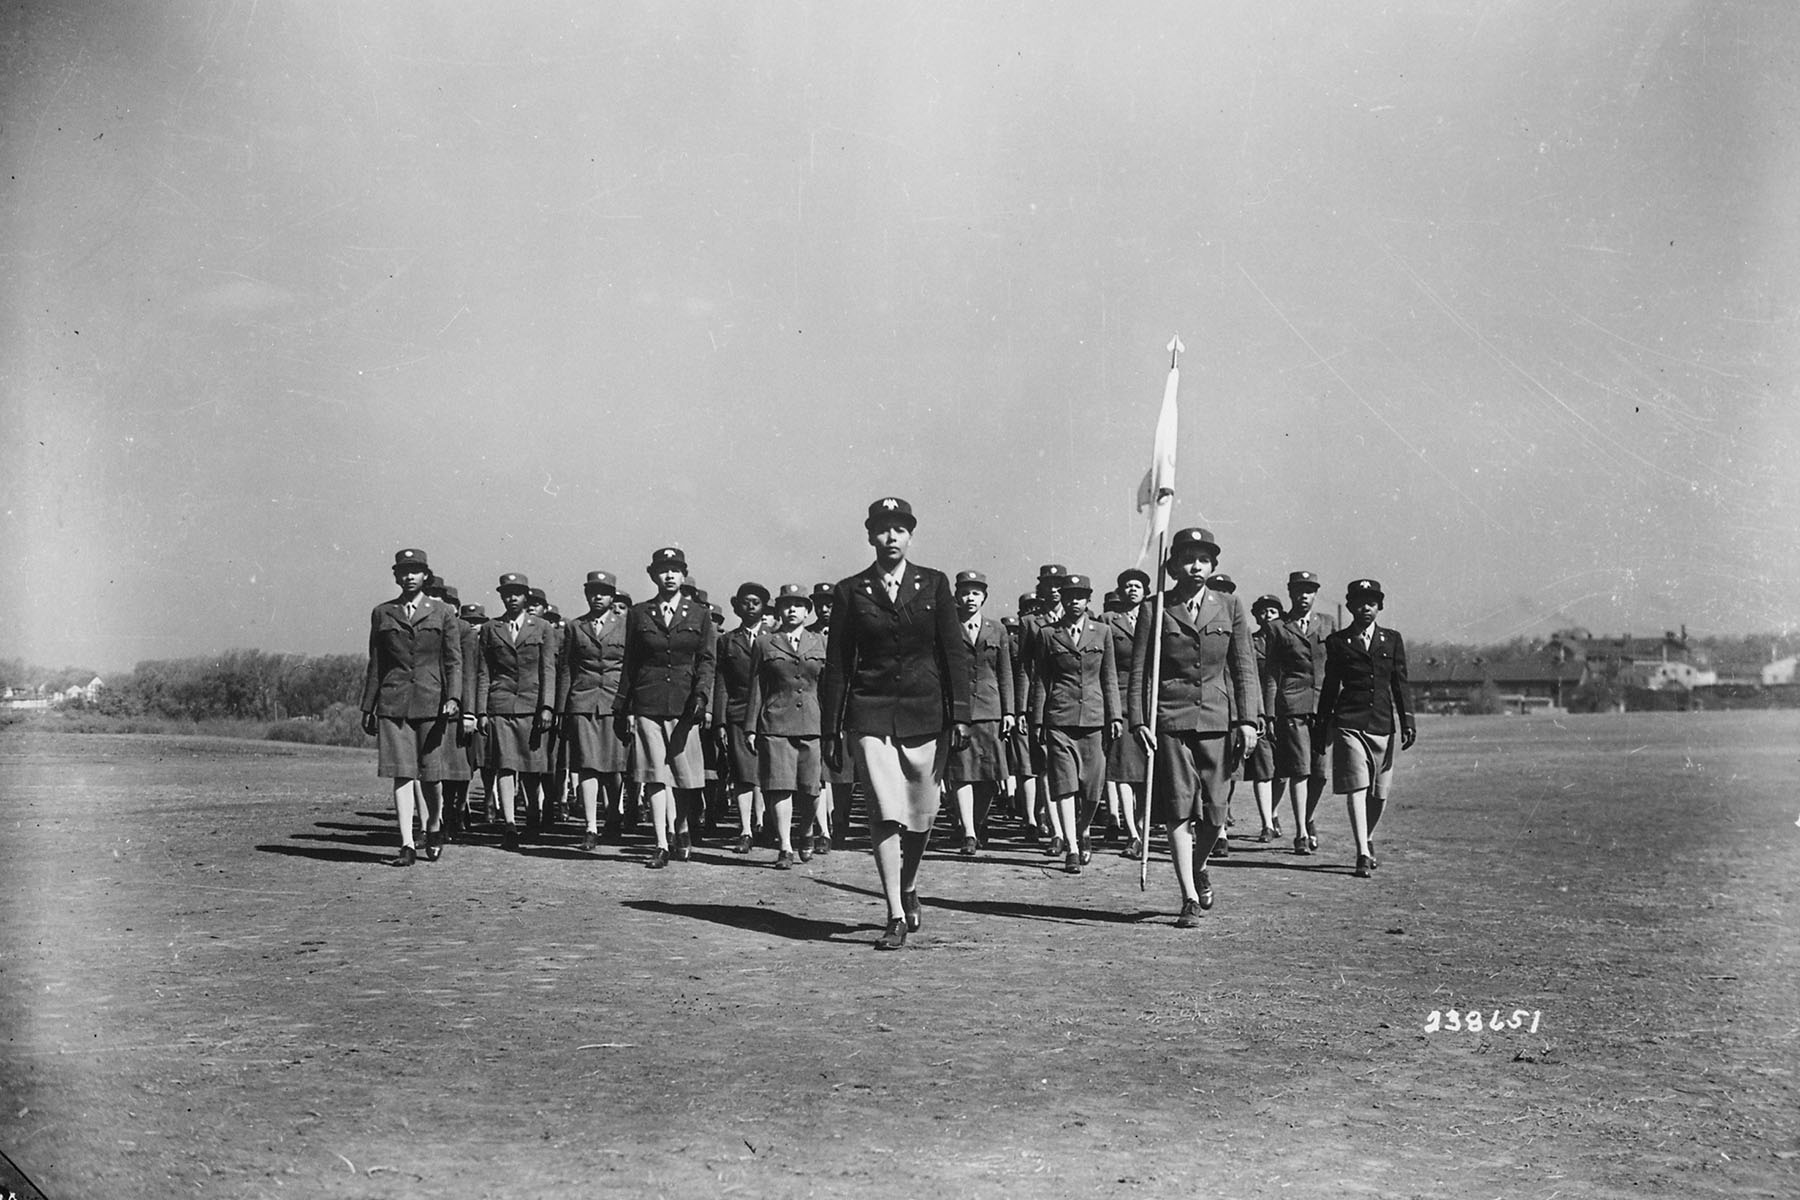 Captain Adams drills her company at a training center.